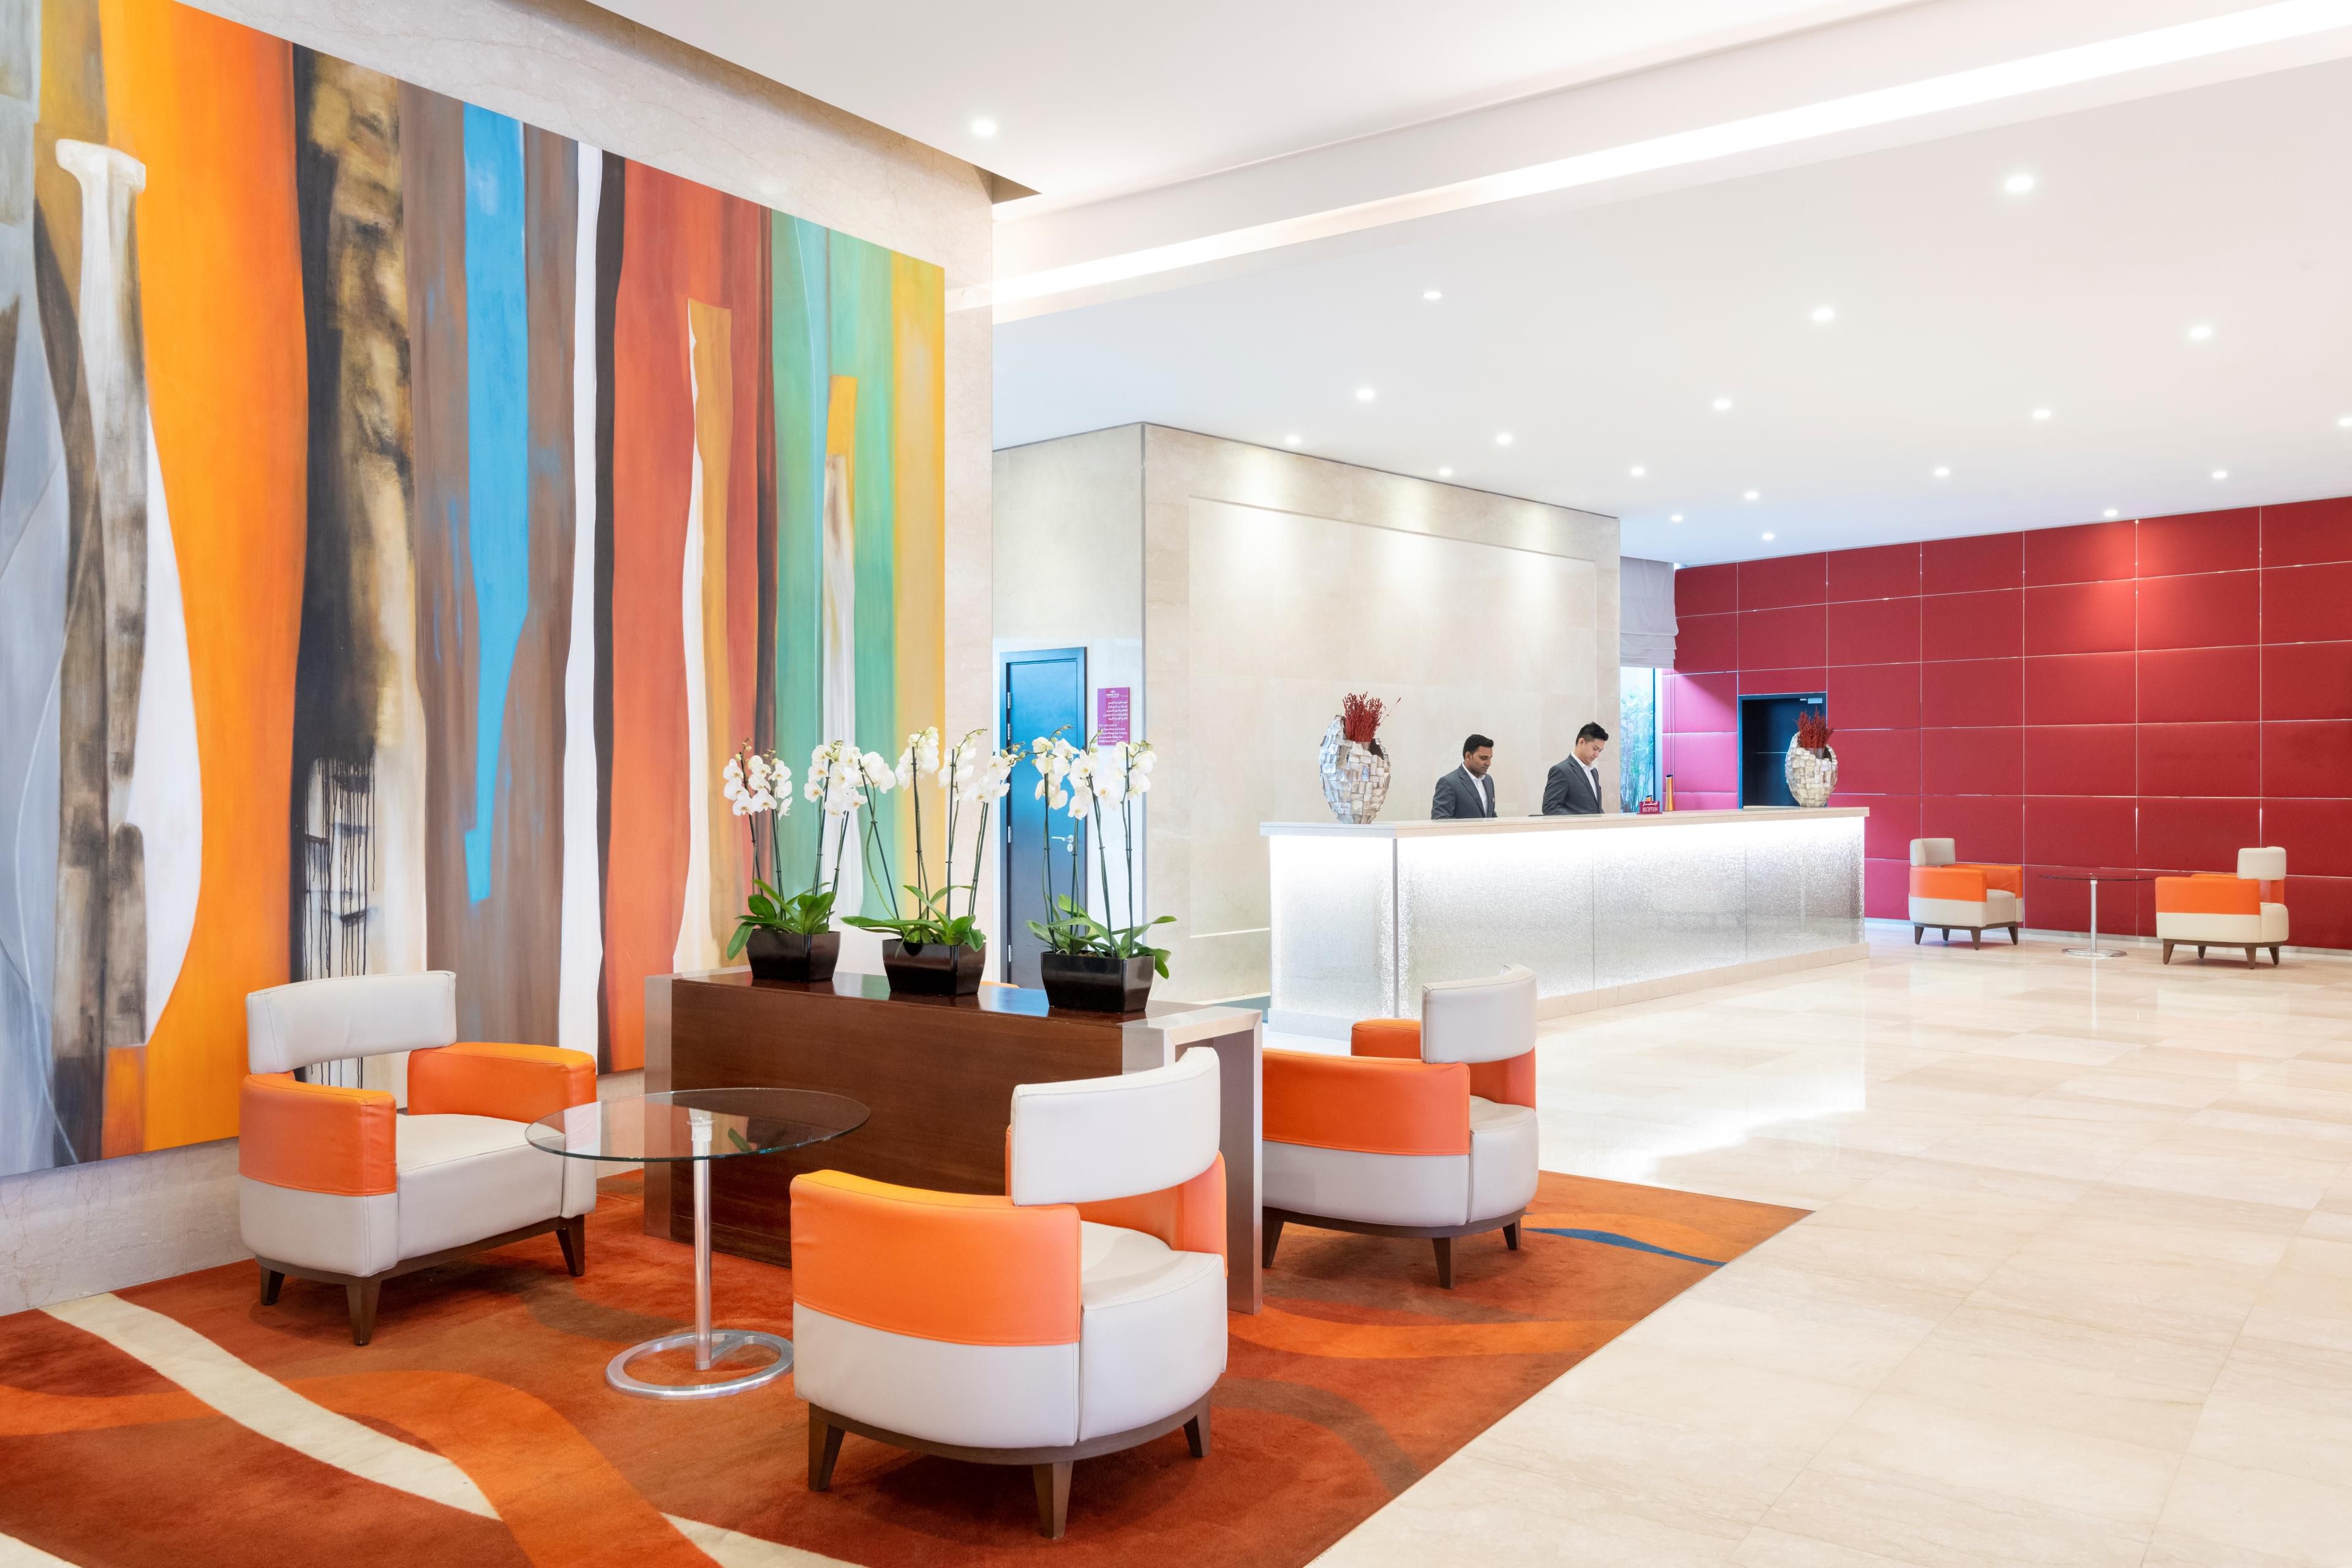 Bright and colorful, our lobby is a refreshing place to meet in.